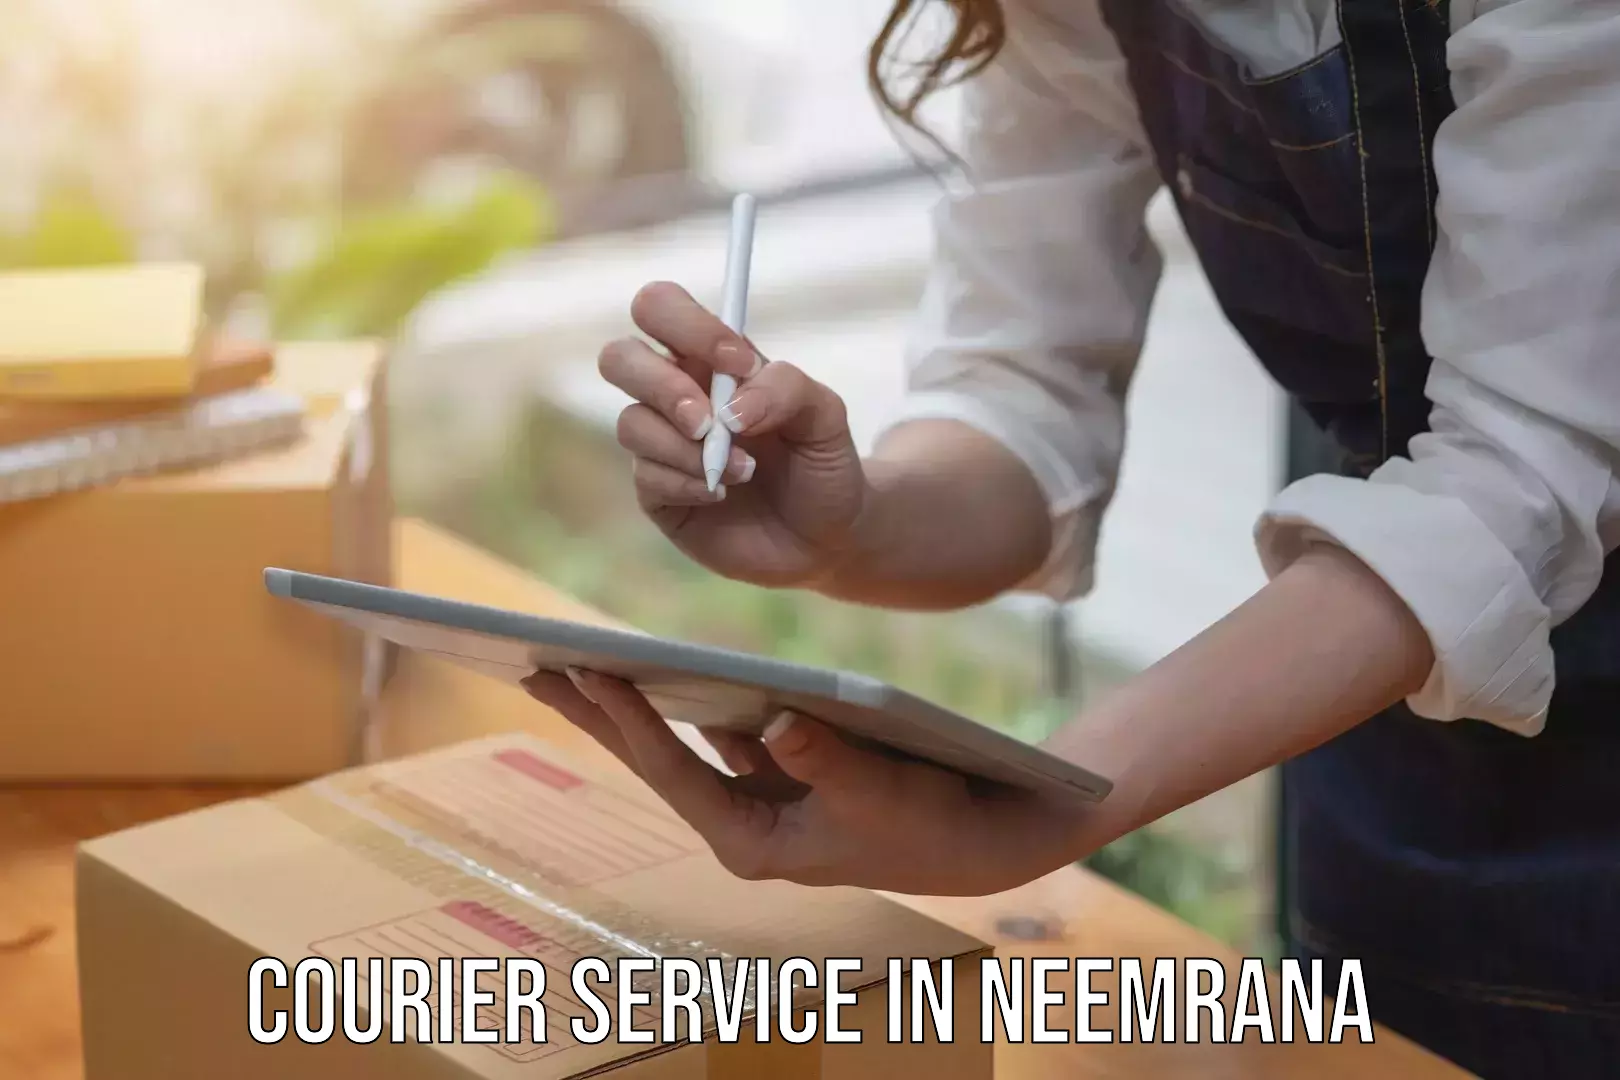 Postal and courier services in Neemrana